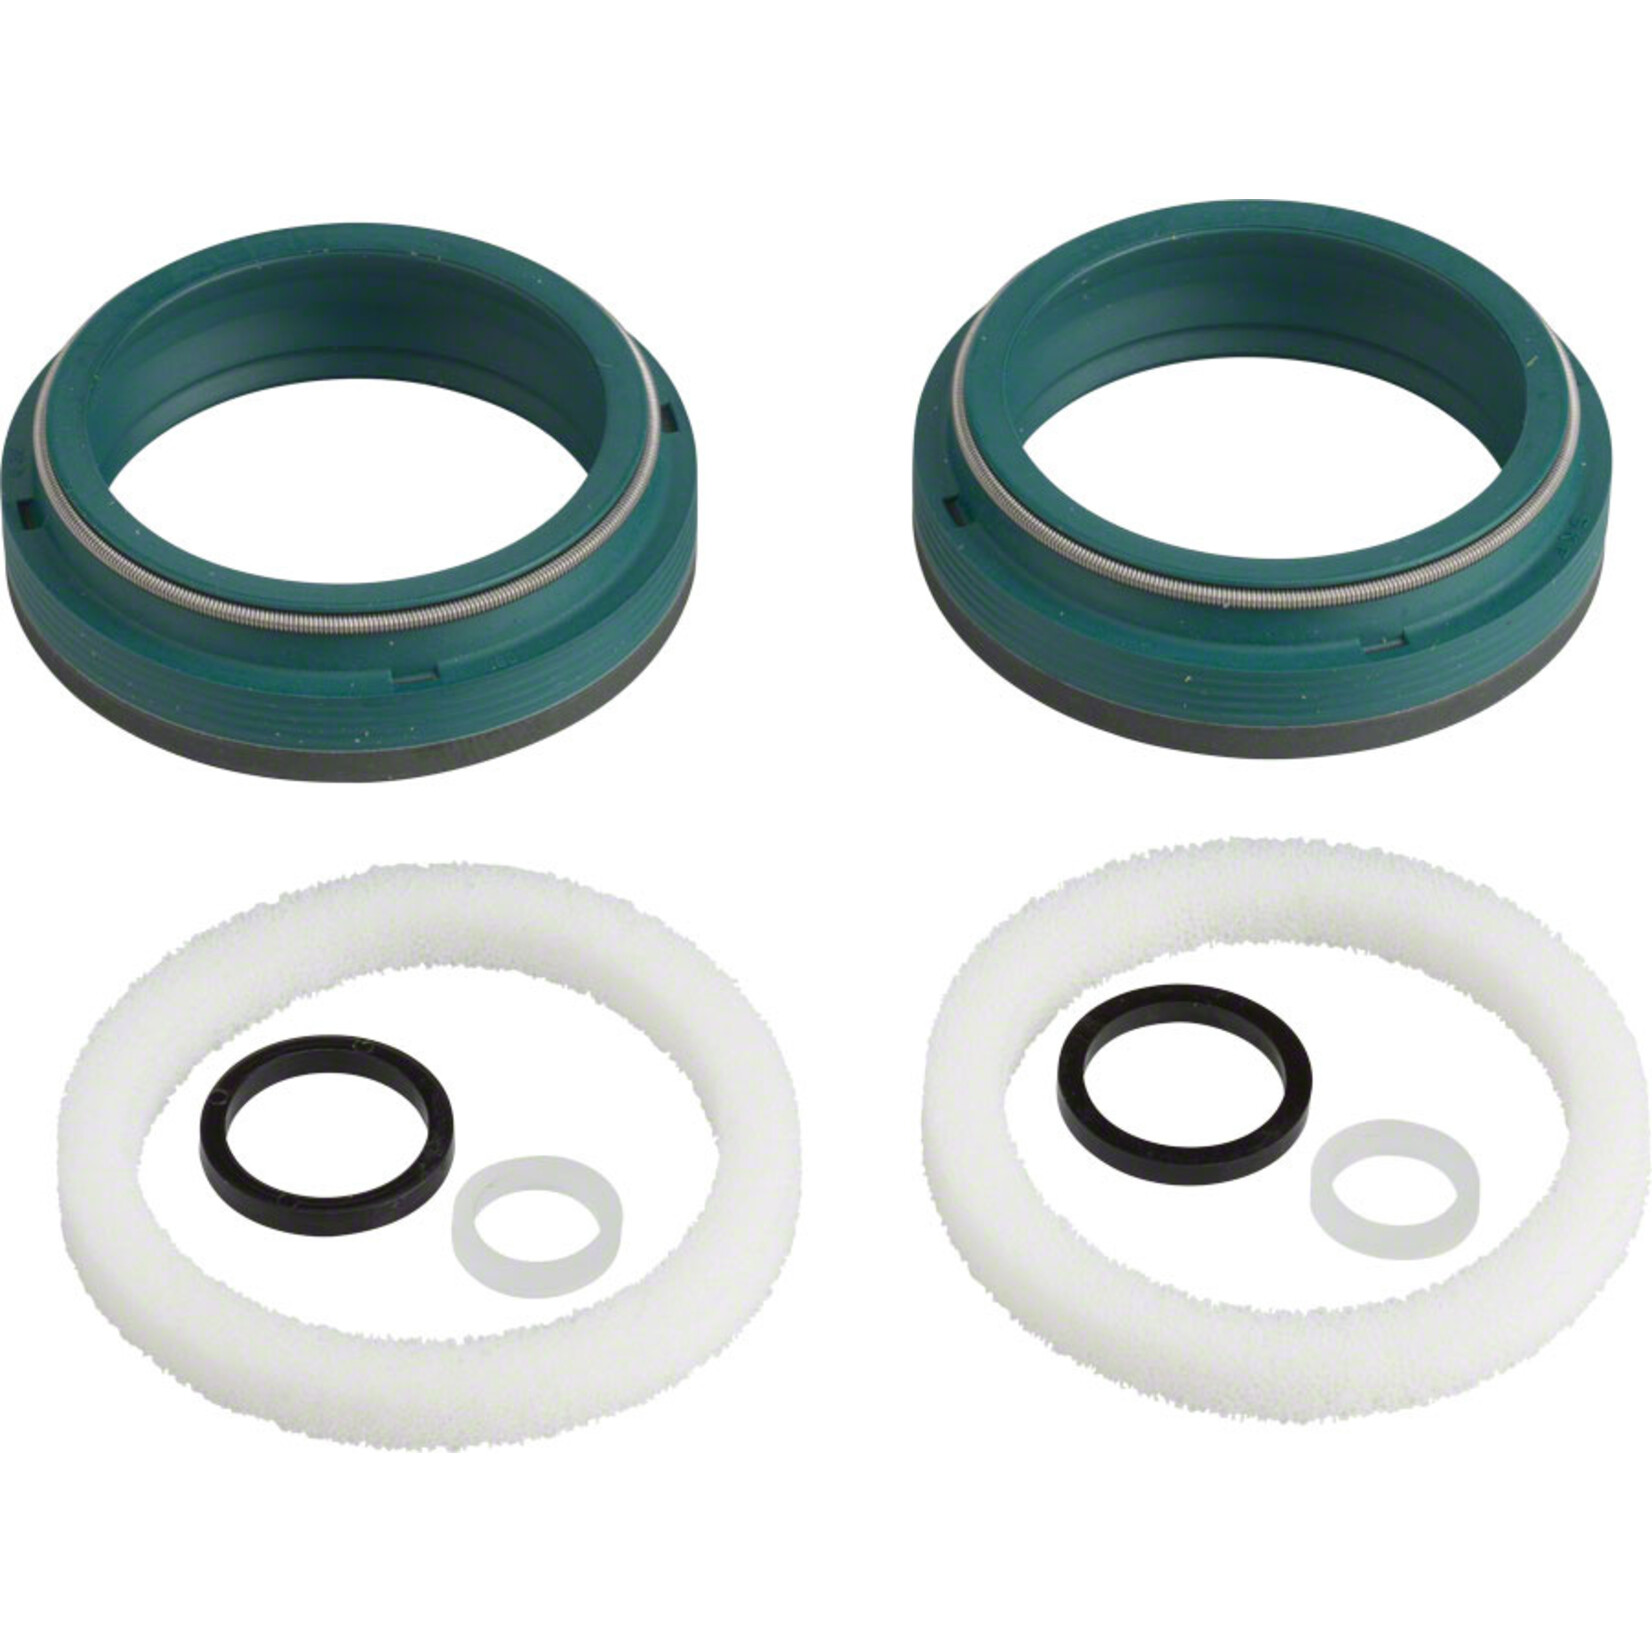 SKF Low-Friction Dust and Oil Seal Kit: FOX 38mm Forks